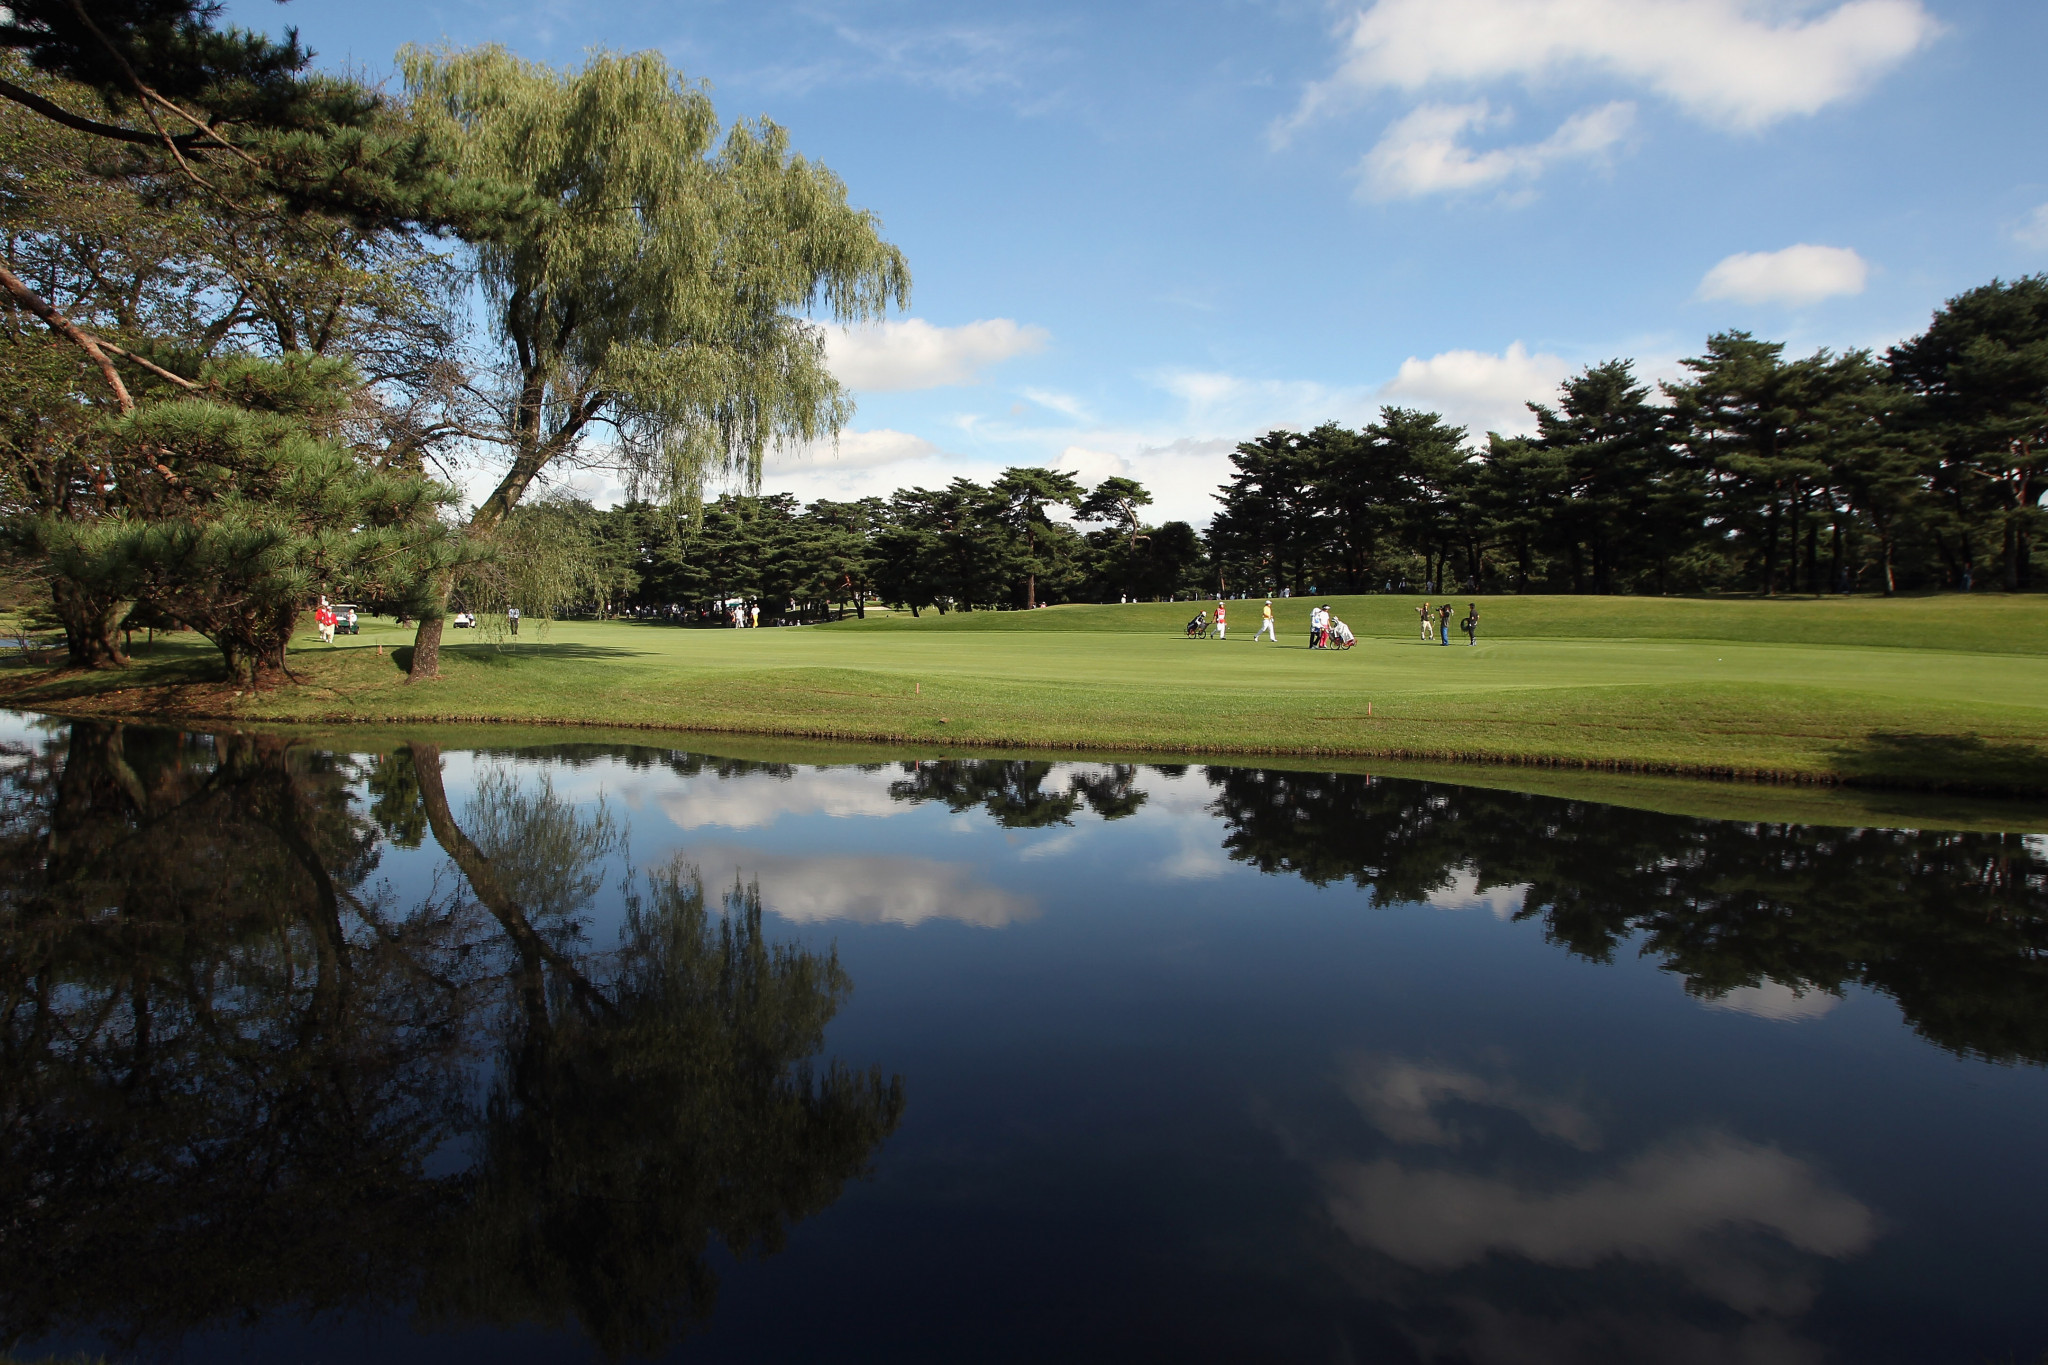 Tokyo 2020 golf course set to be put to test with hosting of Japan Junior Championship